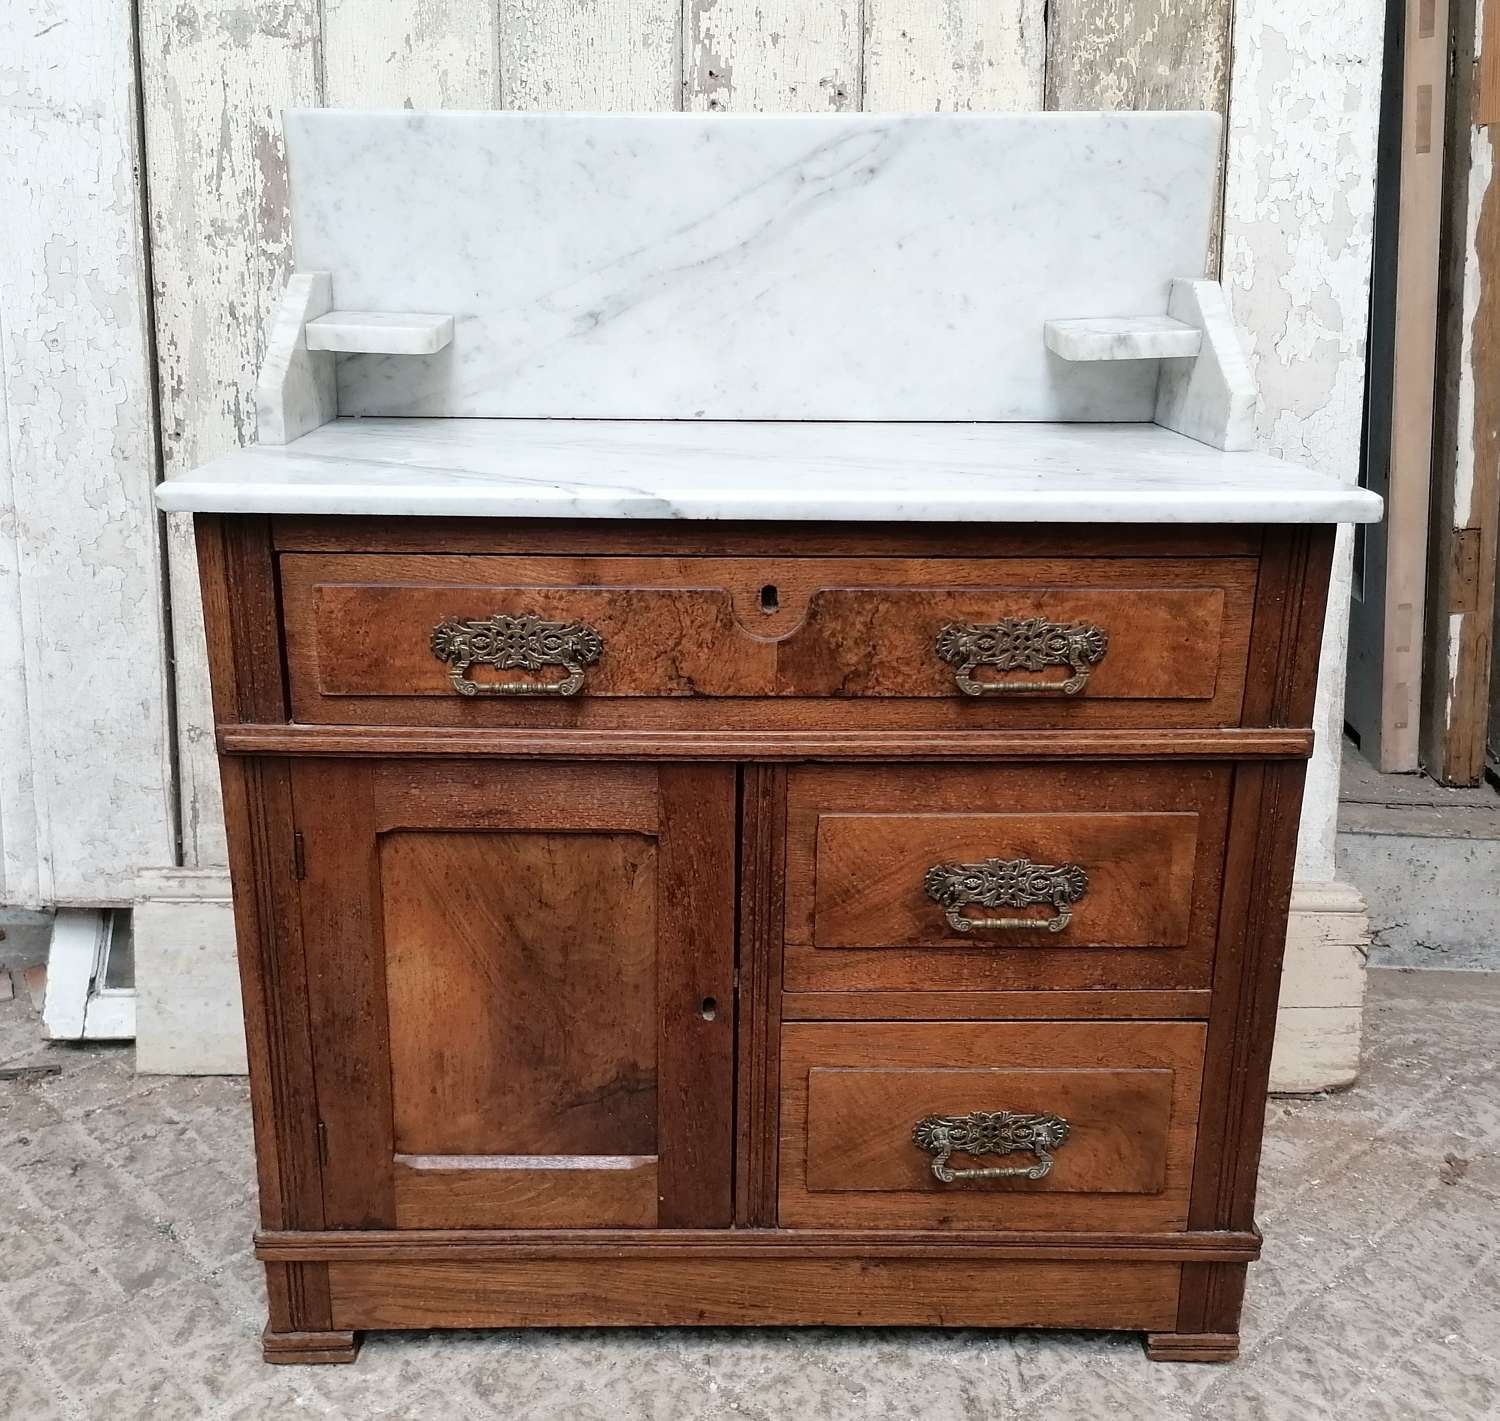 M1642 A RECLAIMED ANTIQUE MARBLE TOPPED WOODEN WASHSTAND / CABINET